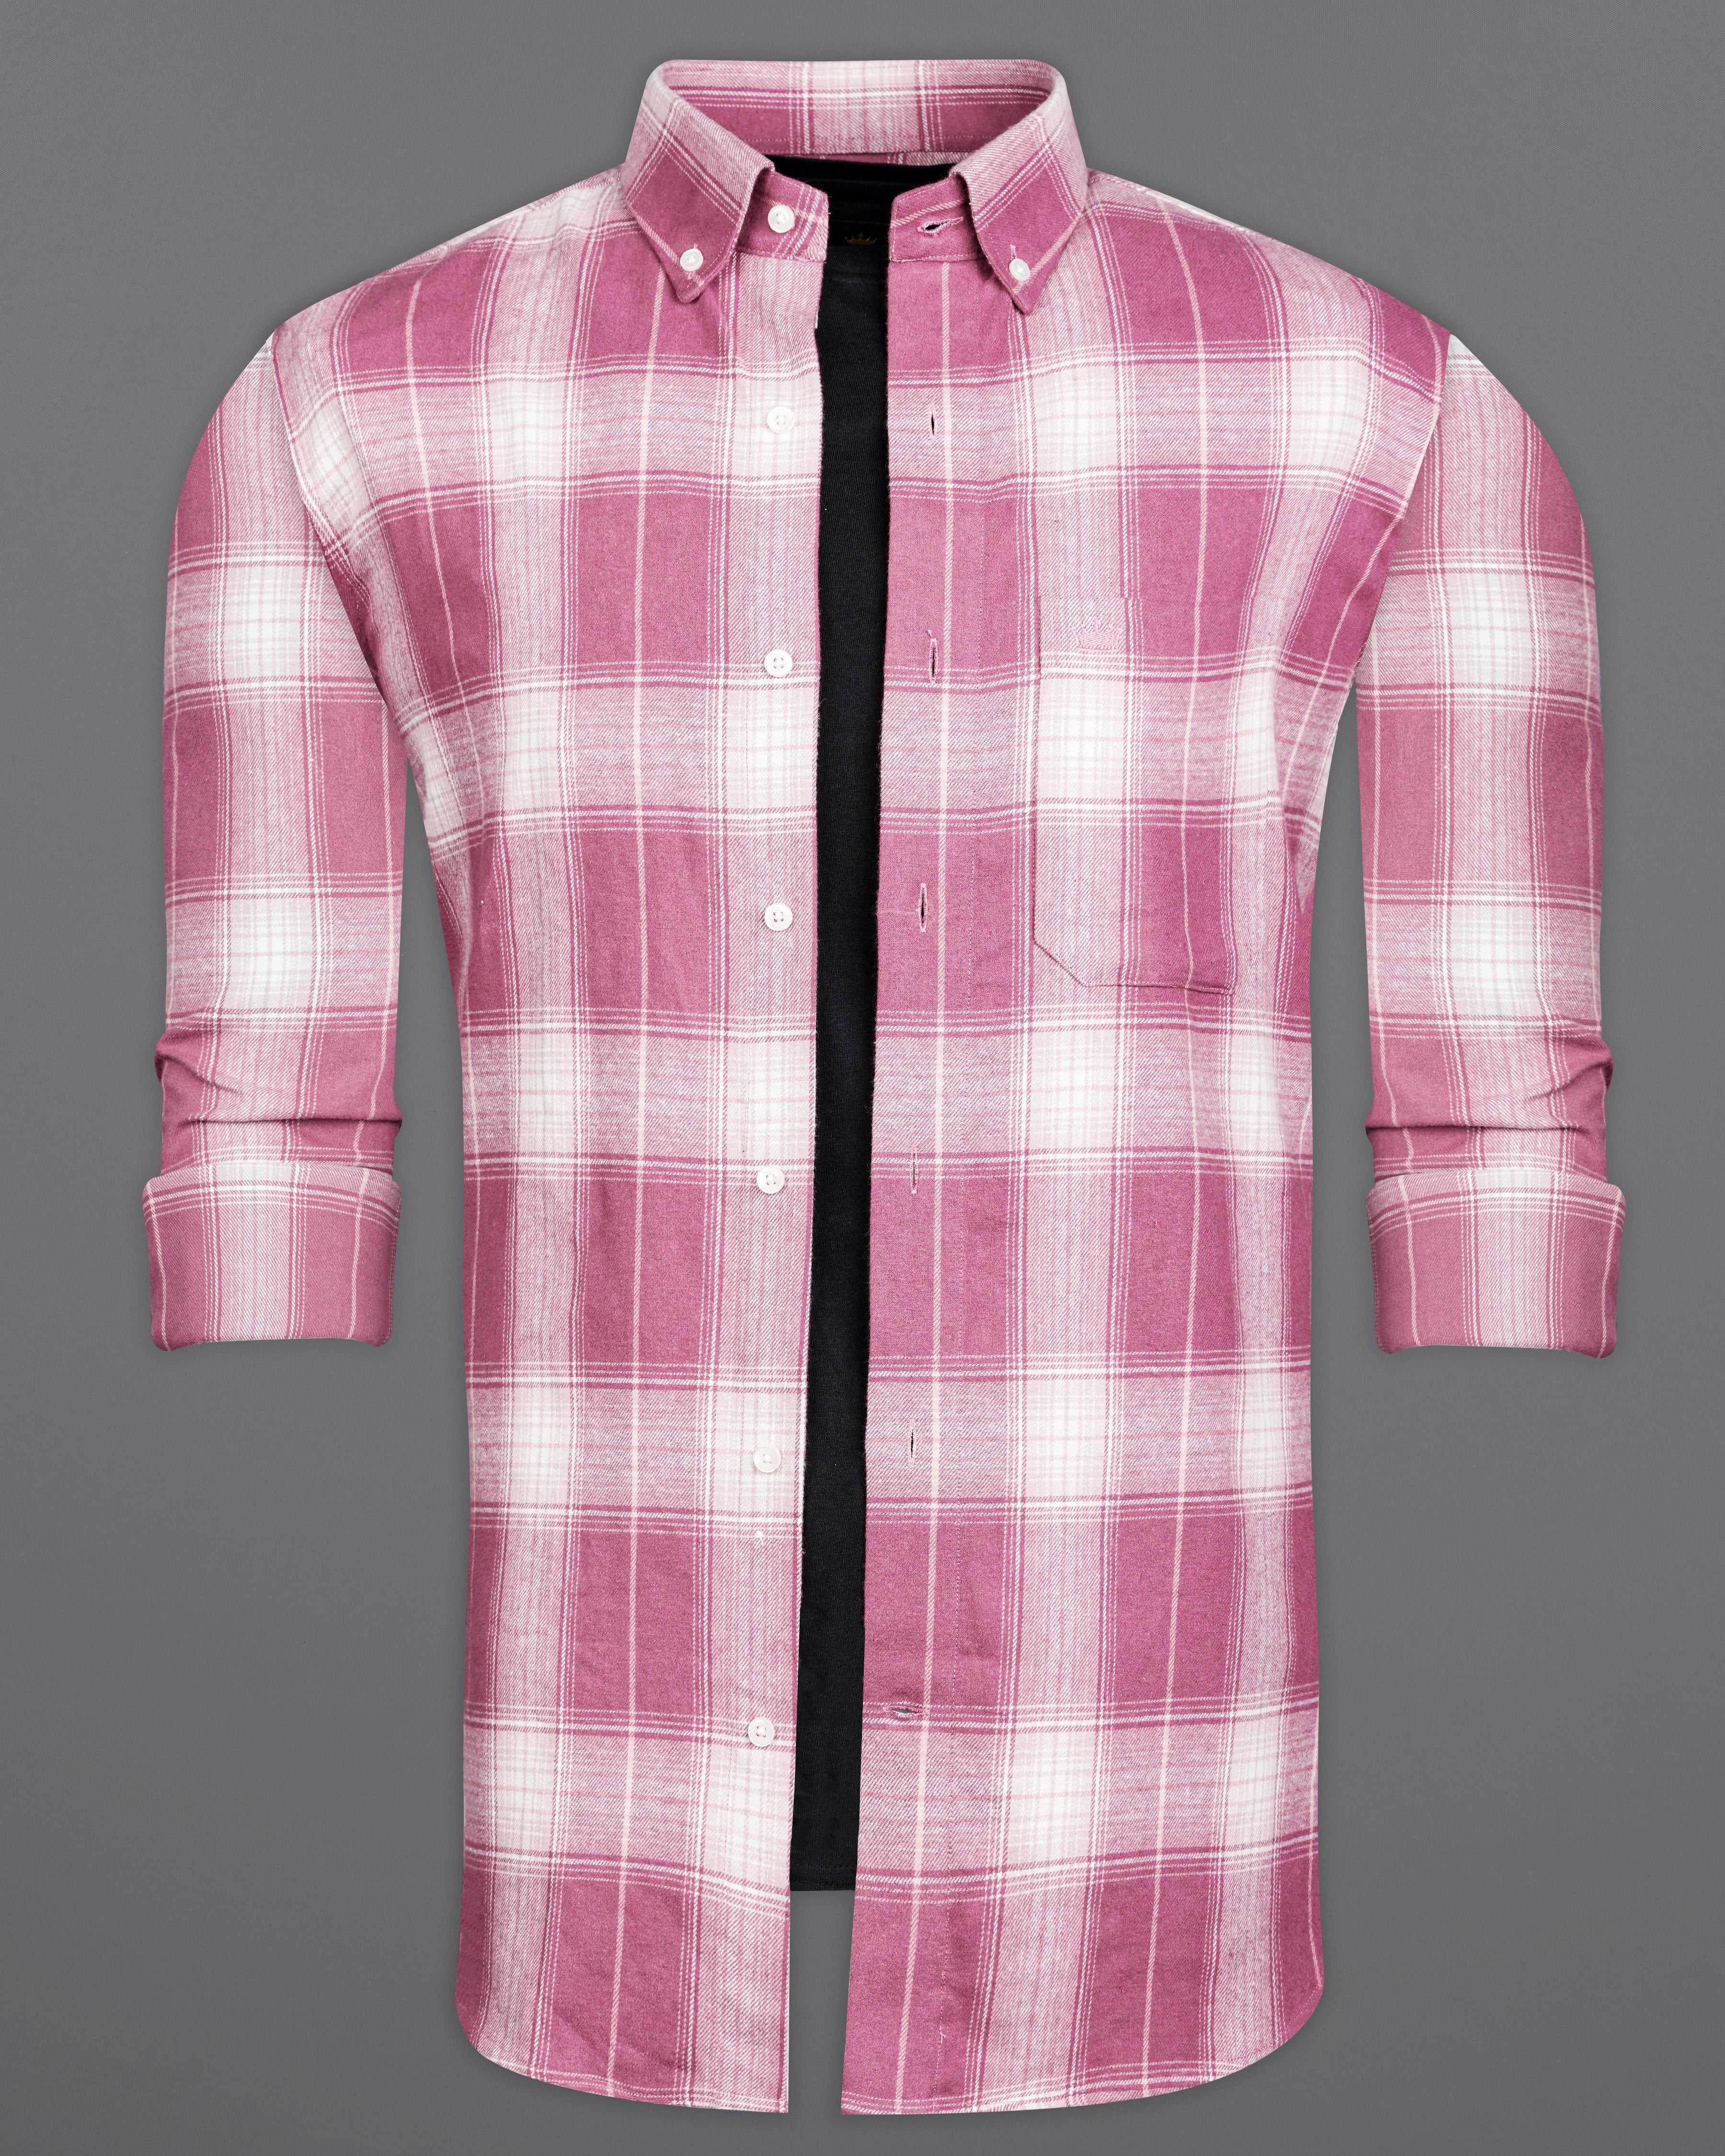 Tapestry Pink with White Plaid Flannel Overshirt/Shacket 9850-BD-OS-38, 9850-BD-OS-H-38, 9850-BD-OS-39, 9850-BD-OS-H-39, 9850-BD-OS-40, 9850-BD-OS-H-40, 9850-BD-OS-42, 9850-BD-OS-H-42, 9850-BD-OS-44, 9850-BD-OS-H-44, 9850-BD-OS-46, 9850-BD-OS-H-46, 9850-BD-OS-48, 9850-BD-OS-H-48, 9850-BD-OS-50, 9850-BD-OS-H-50, 9850-BD-OS-52, 9850-BD-OS-H-52